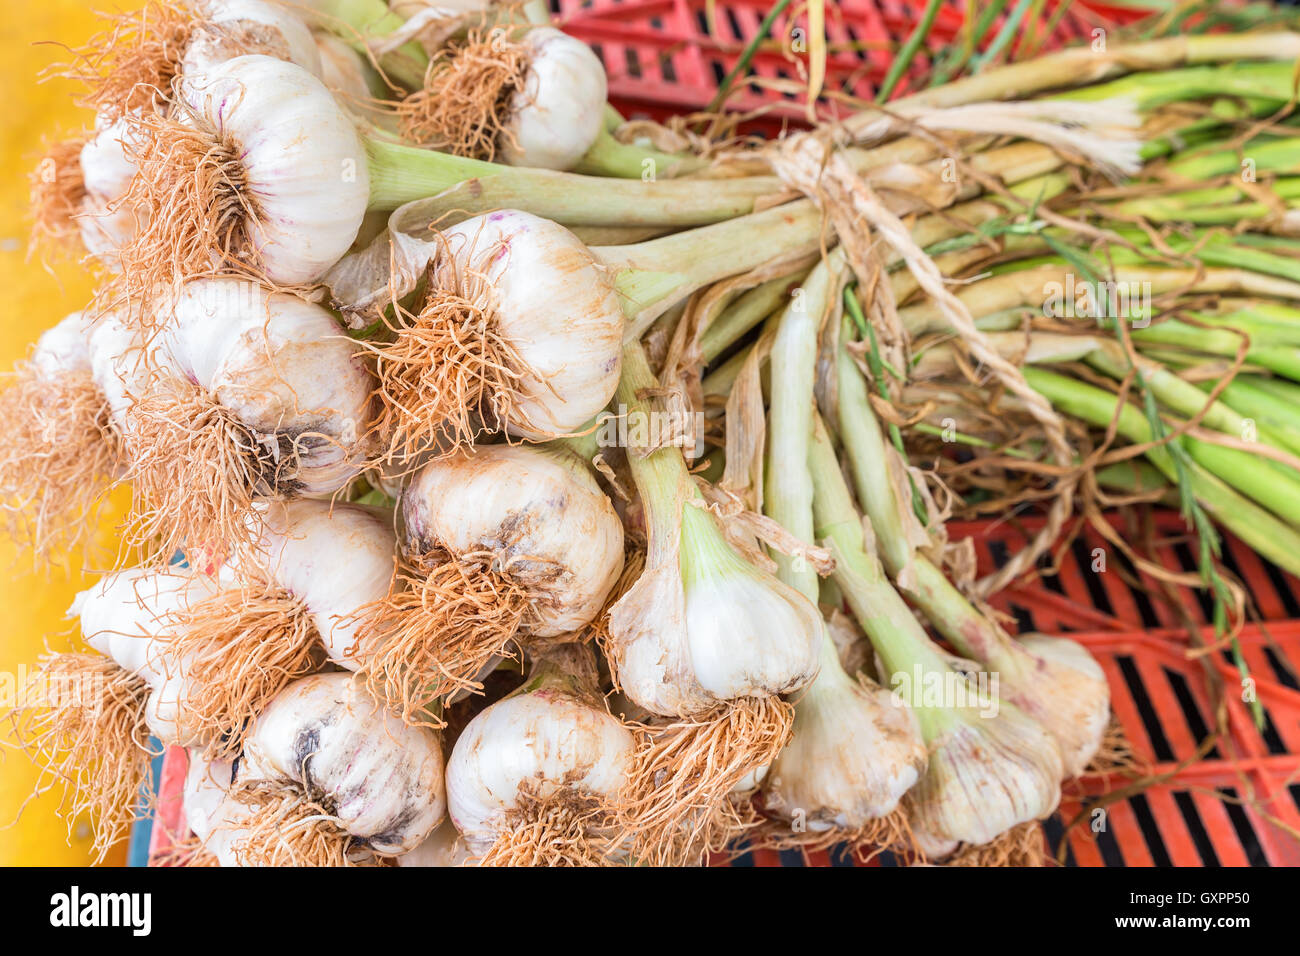 Bunch of garlic bulbs with stalks tied together with a rope Stock Photo